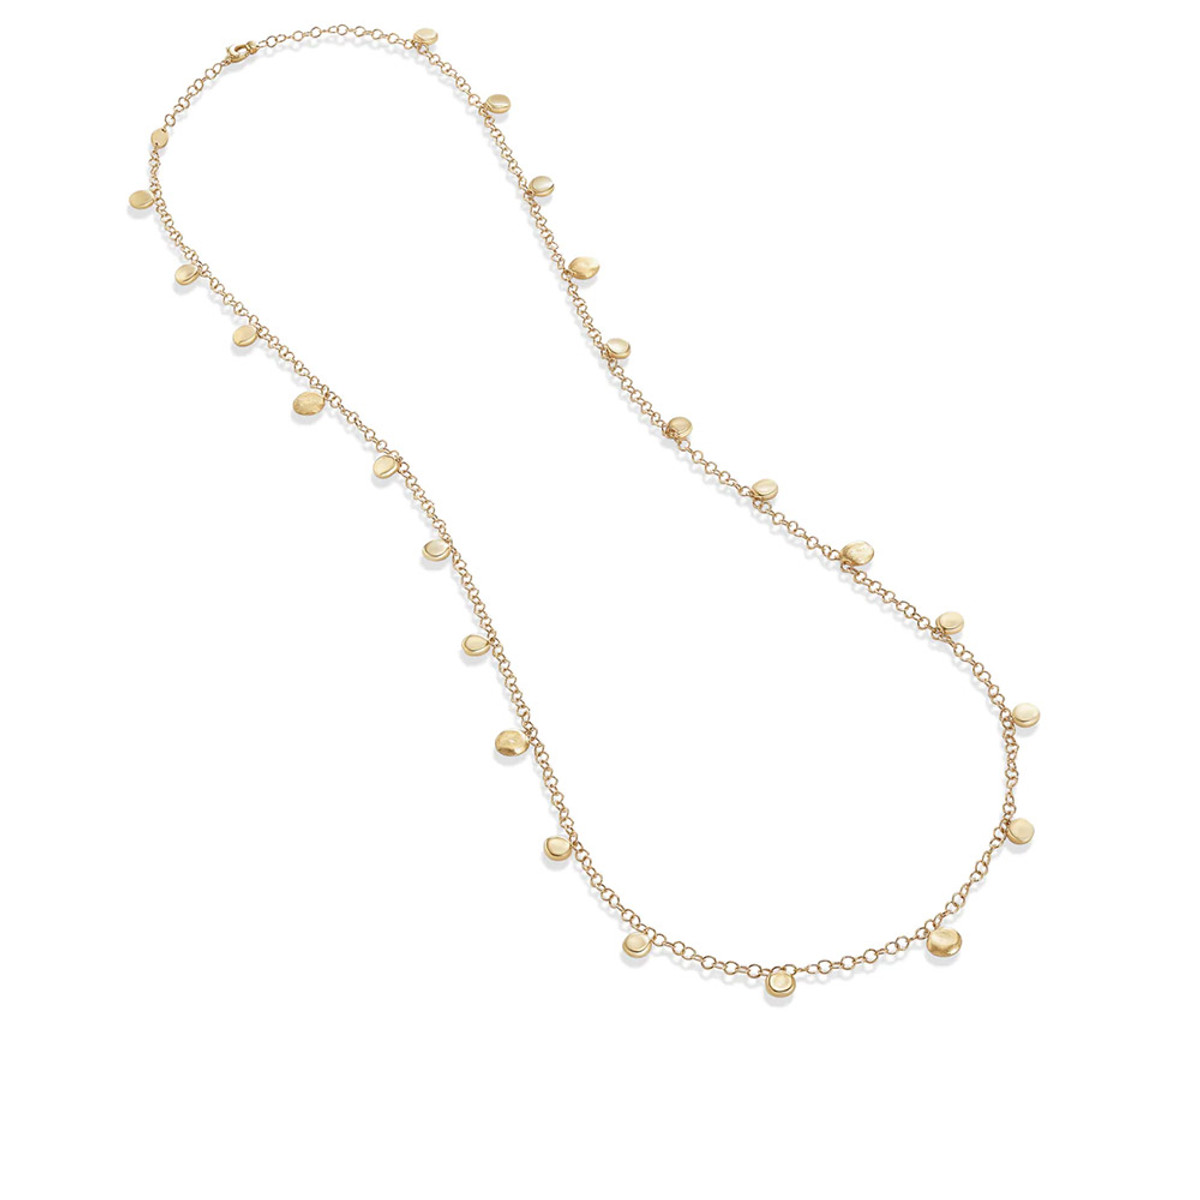 Marco Bicego 18K Yellow Gold Jaipur Engraved and Polished Charm Long Necklace-39550